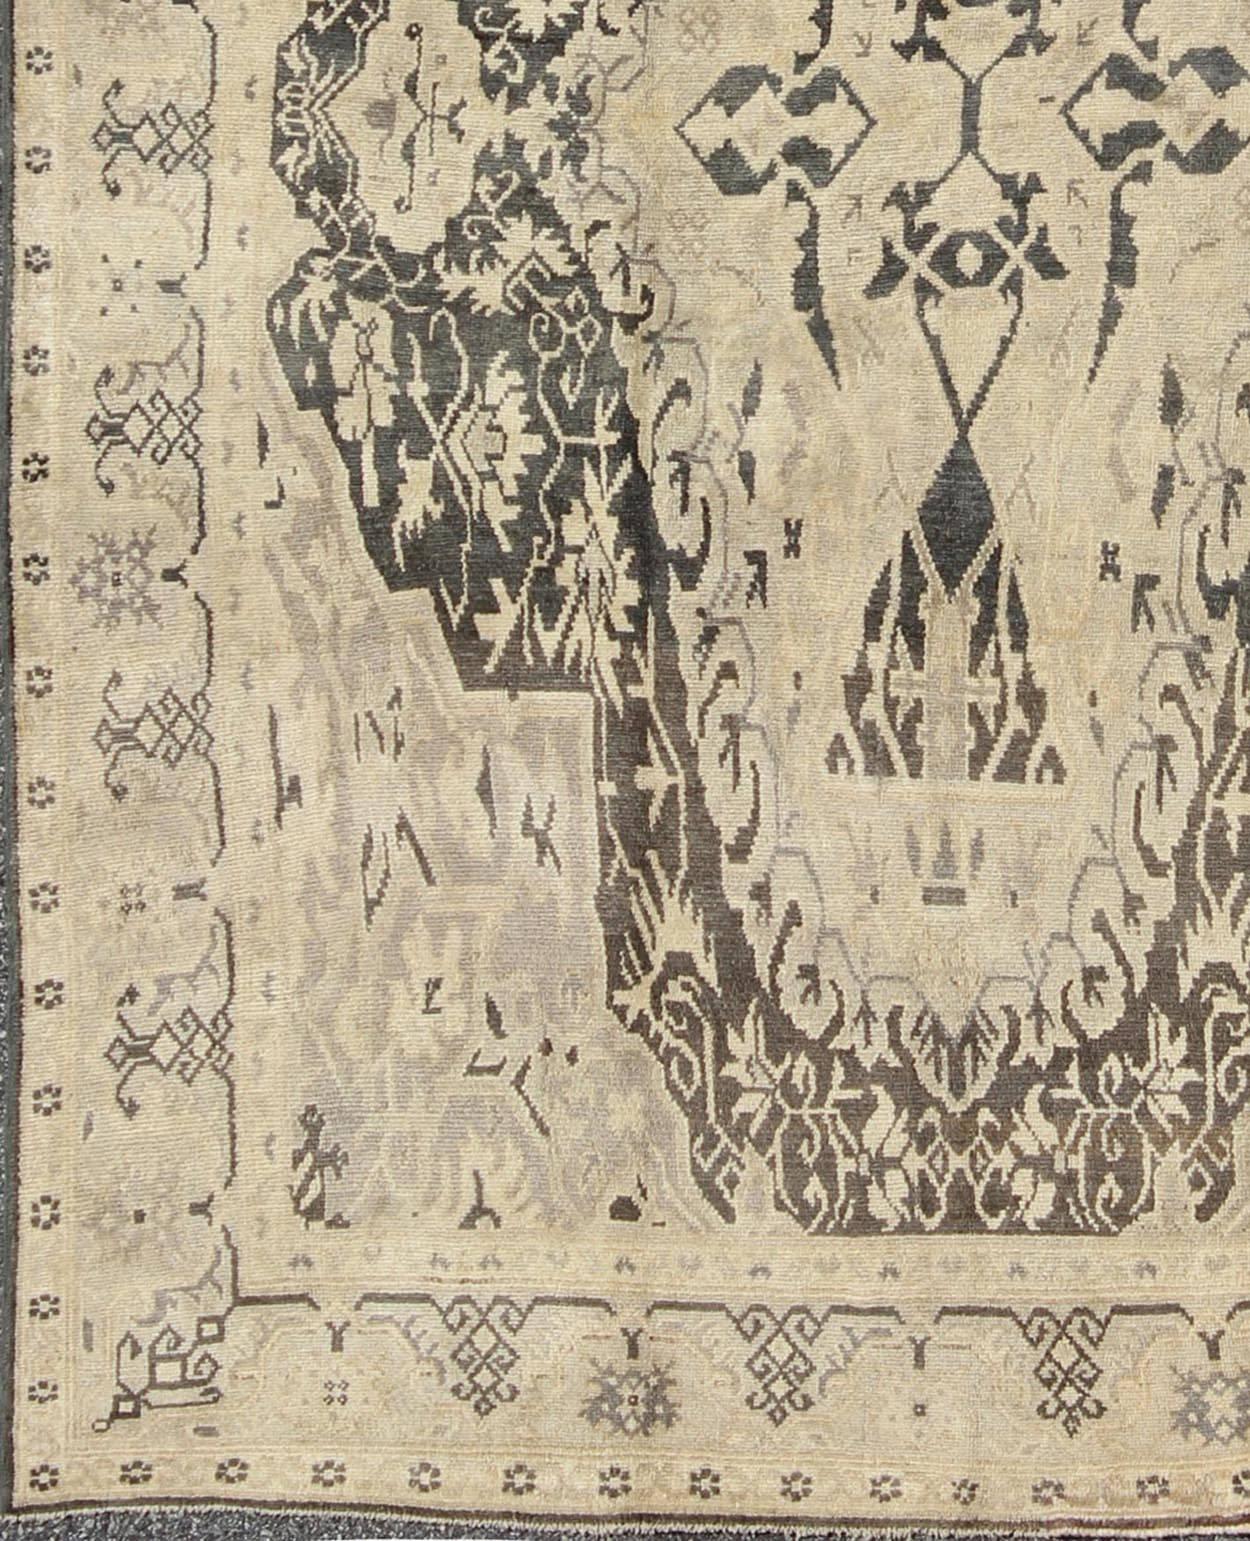 Set on a deep gray green background, this fabulous antique Turkish Sevas showcases a large and bold medallion surrounded by flowers and branches. The intricate design and delicate details allow the eye to fully capture the beauty of the rug. The